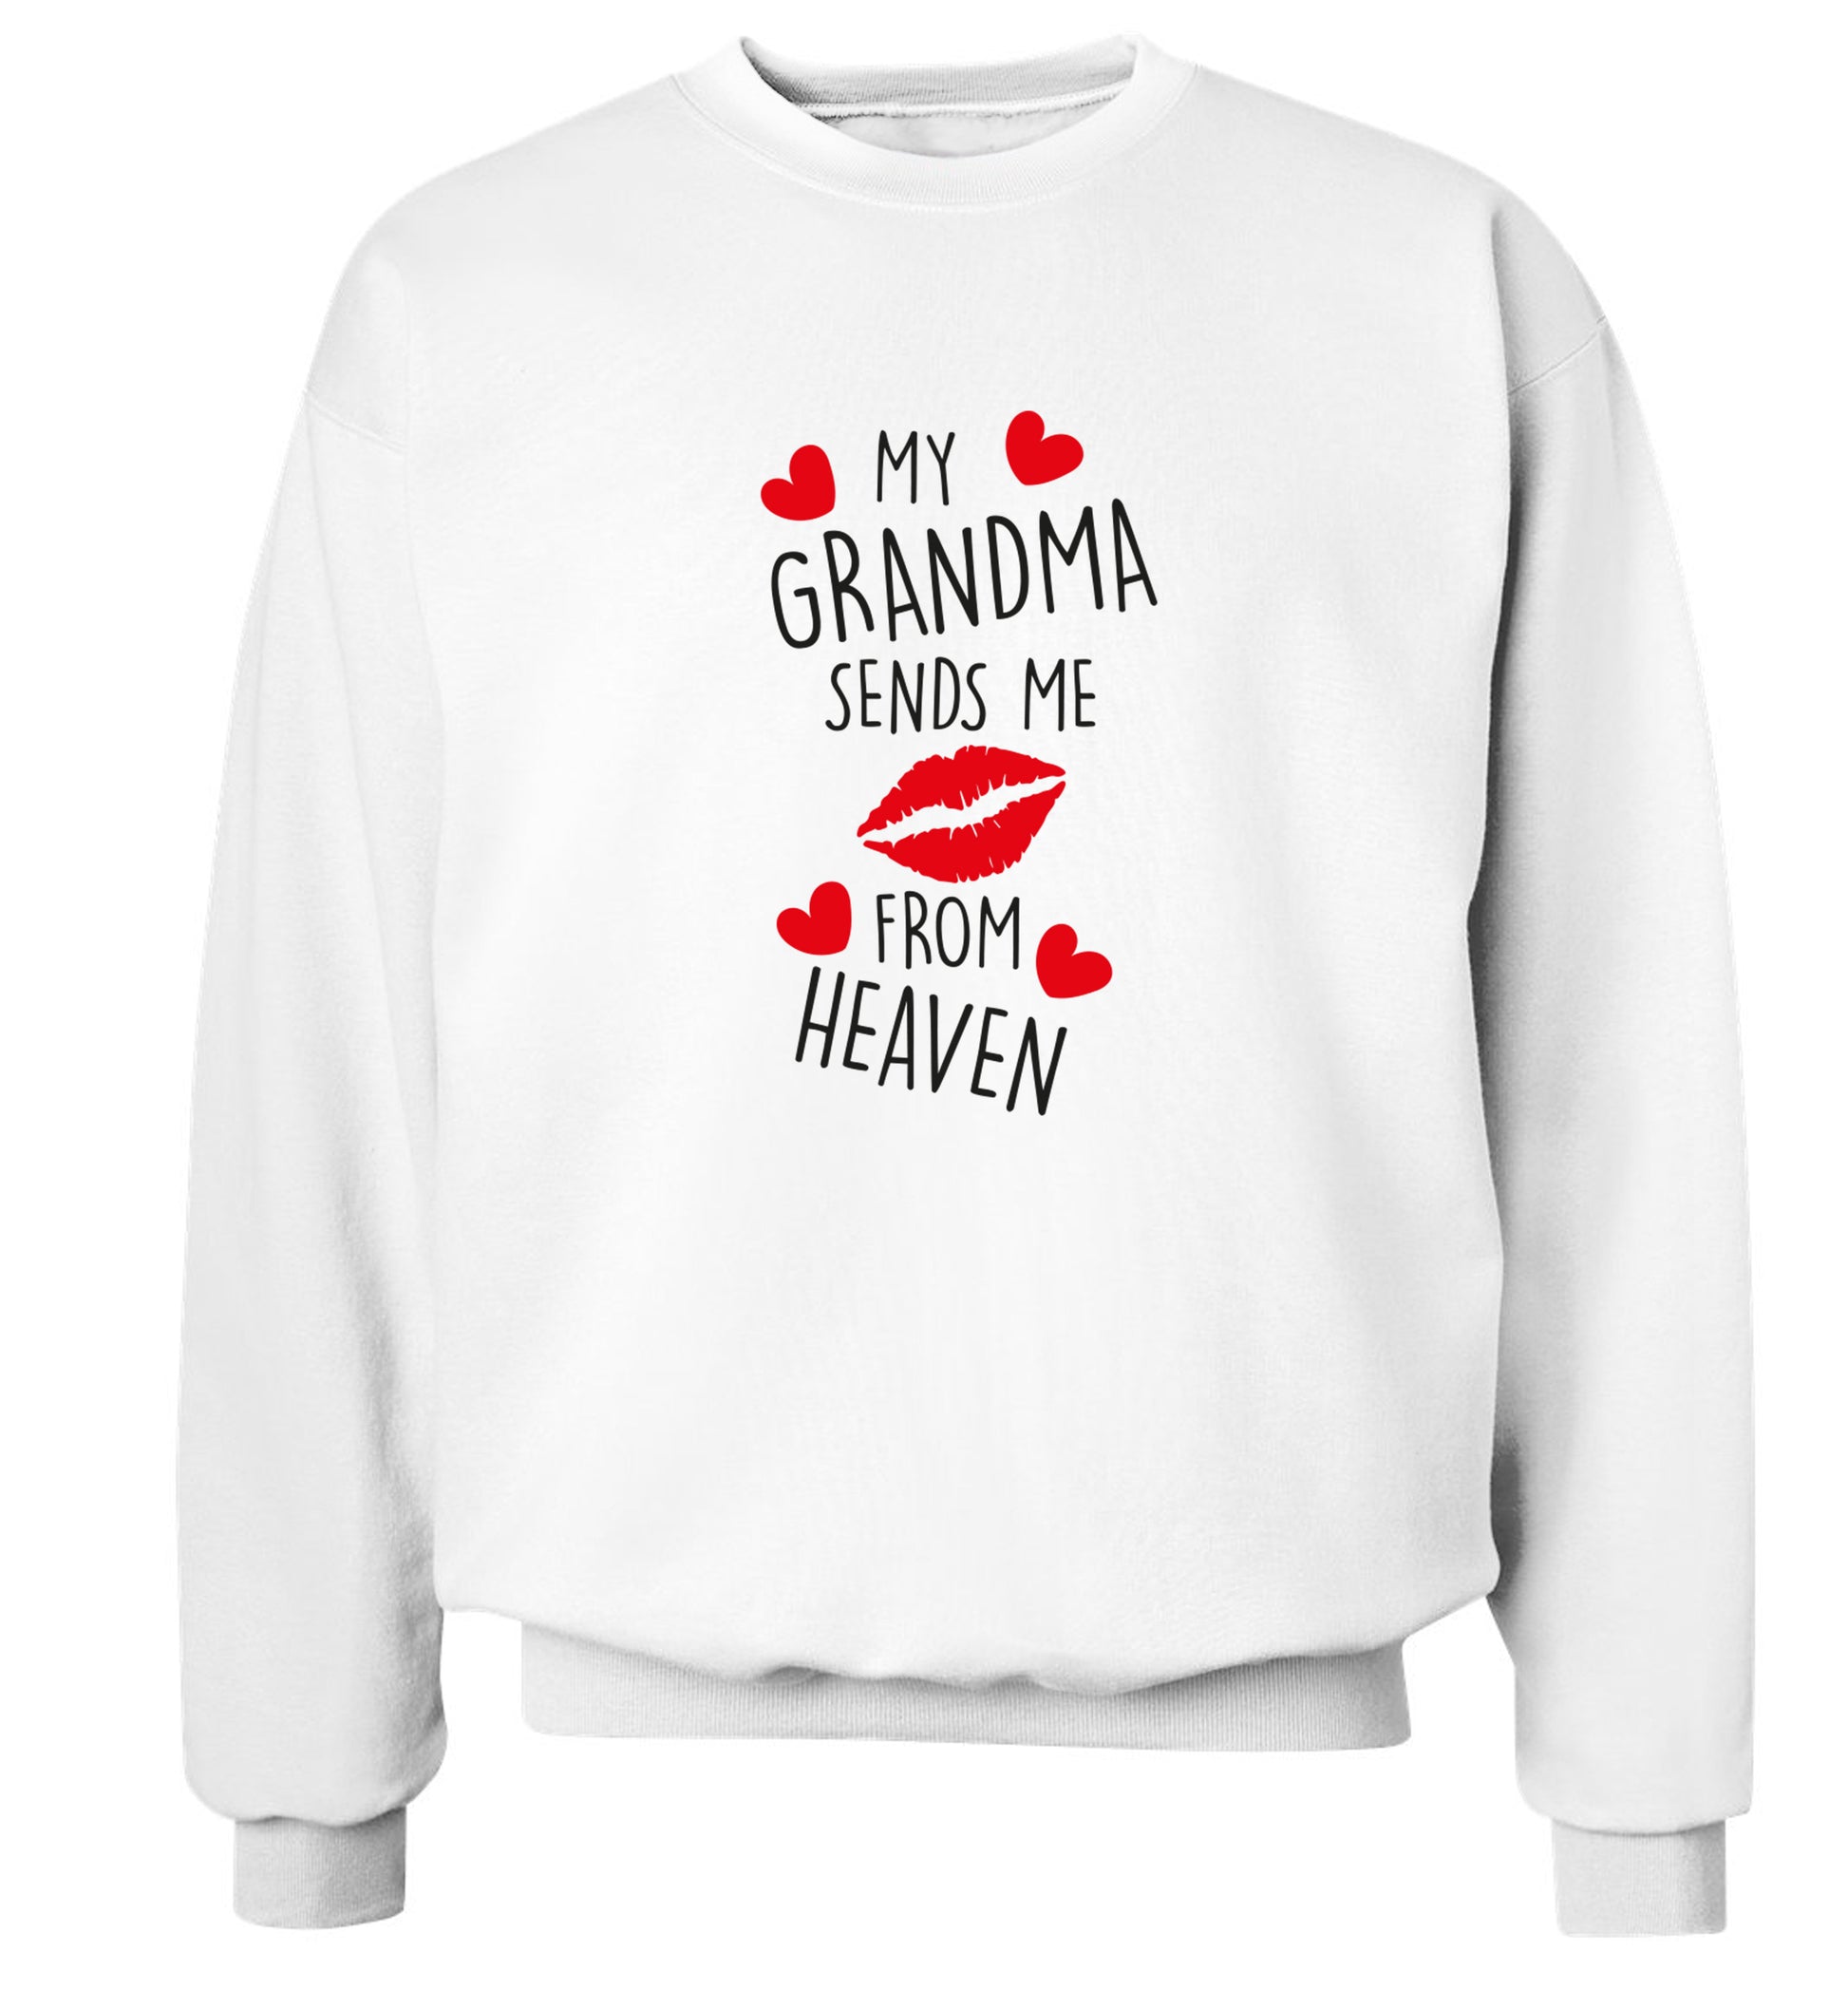 My grandma sends me kisses from heaven Adult's unisex white Sweater 2XL